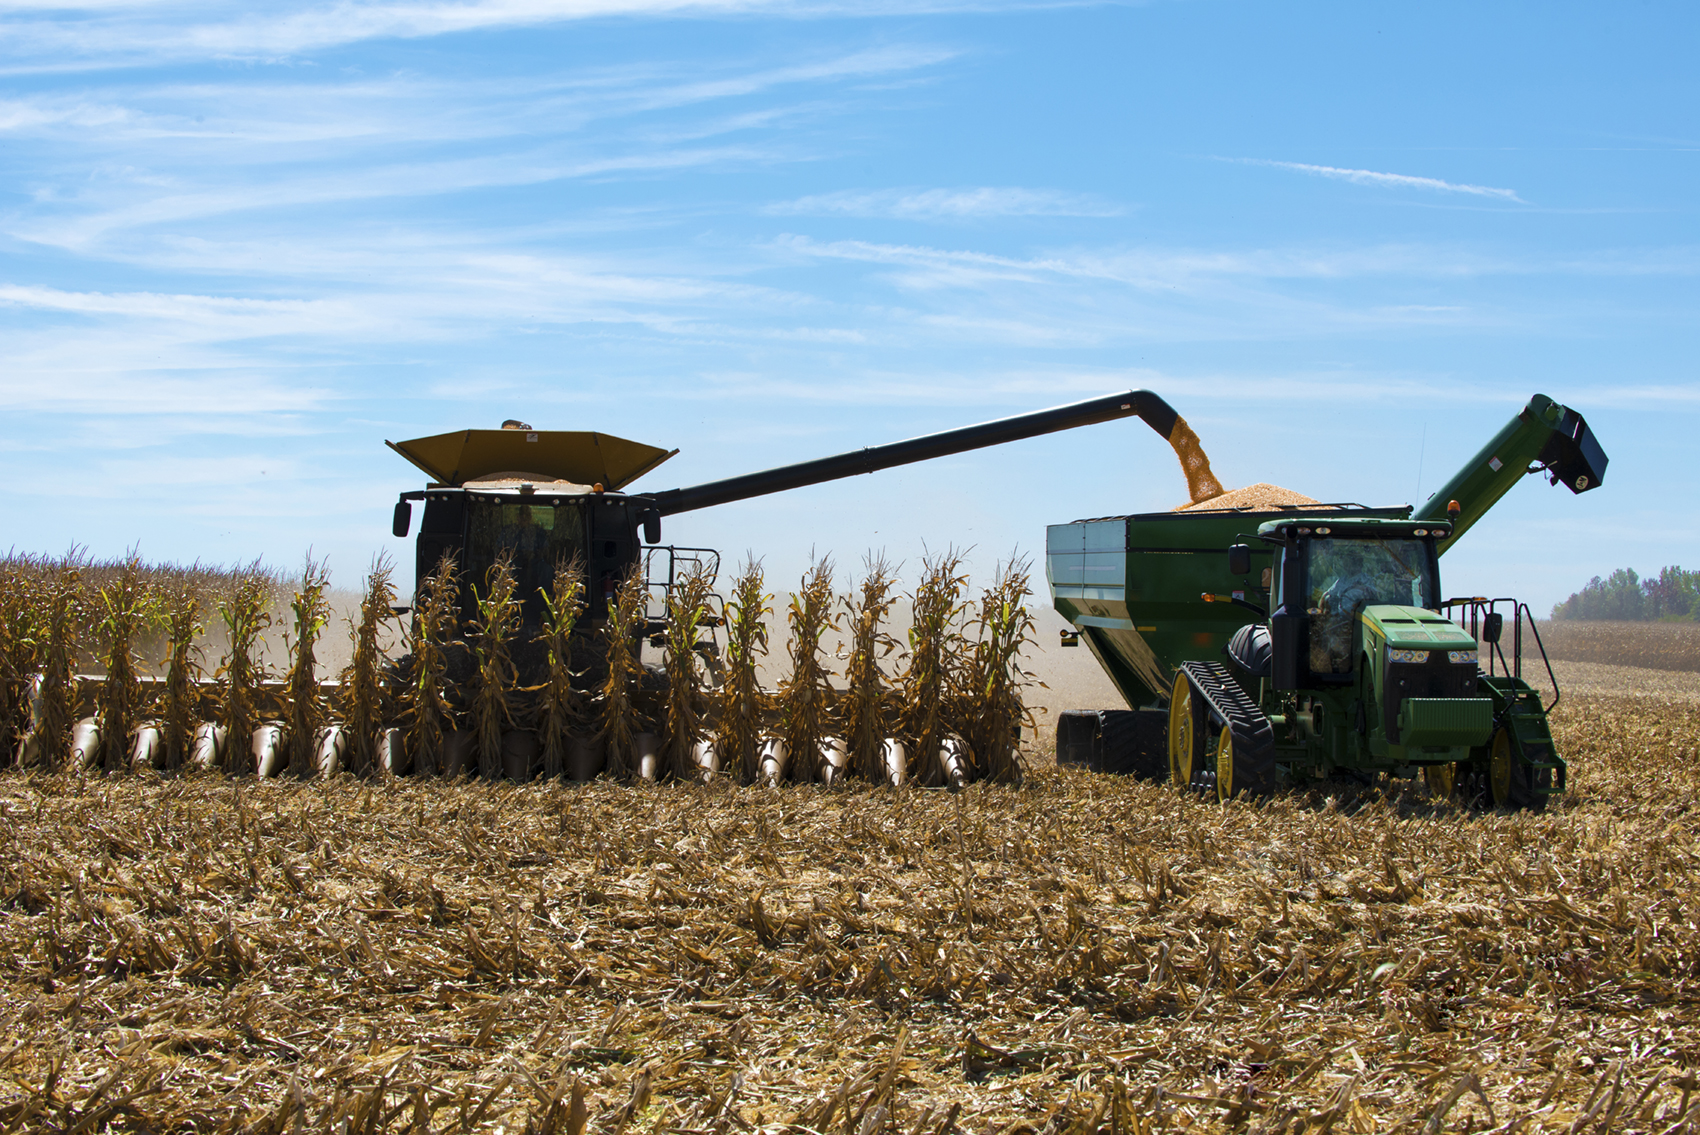 The Trump Administration’s trade war and the related rural economic meltdown is not coincidental, said Gale Lush, American Corn Growers Foundation chairman. According to Lush, who lives in Wilcox, Trump’s tariffs are a major cause of current low corn and soybean prices.  AP file photo.